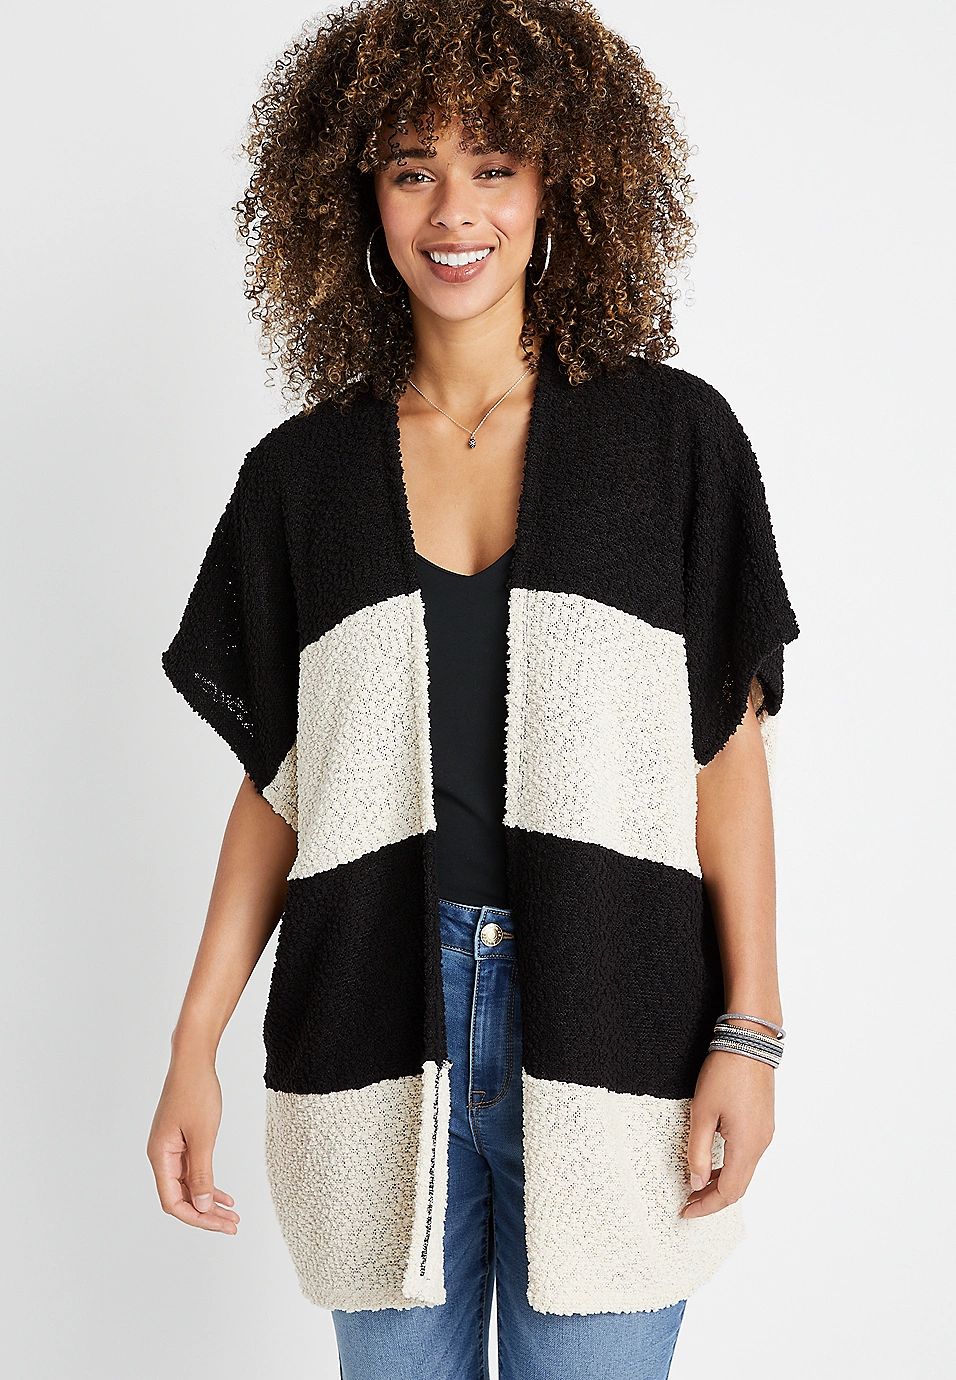 Black and White Striped Short Sleeve Cardigan | Maurices